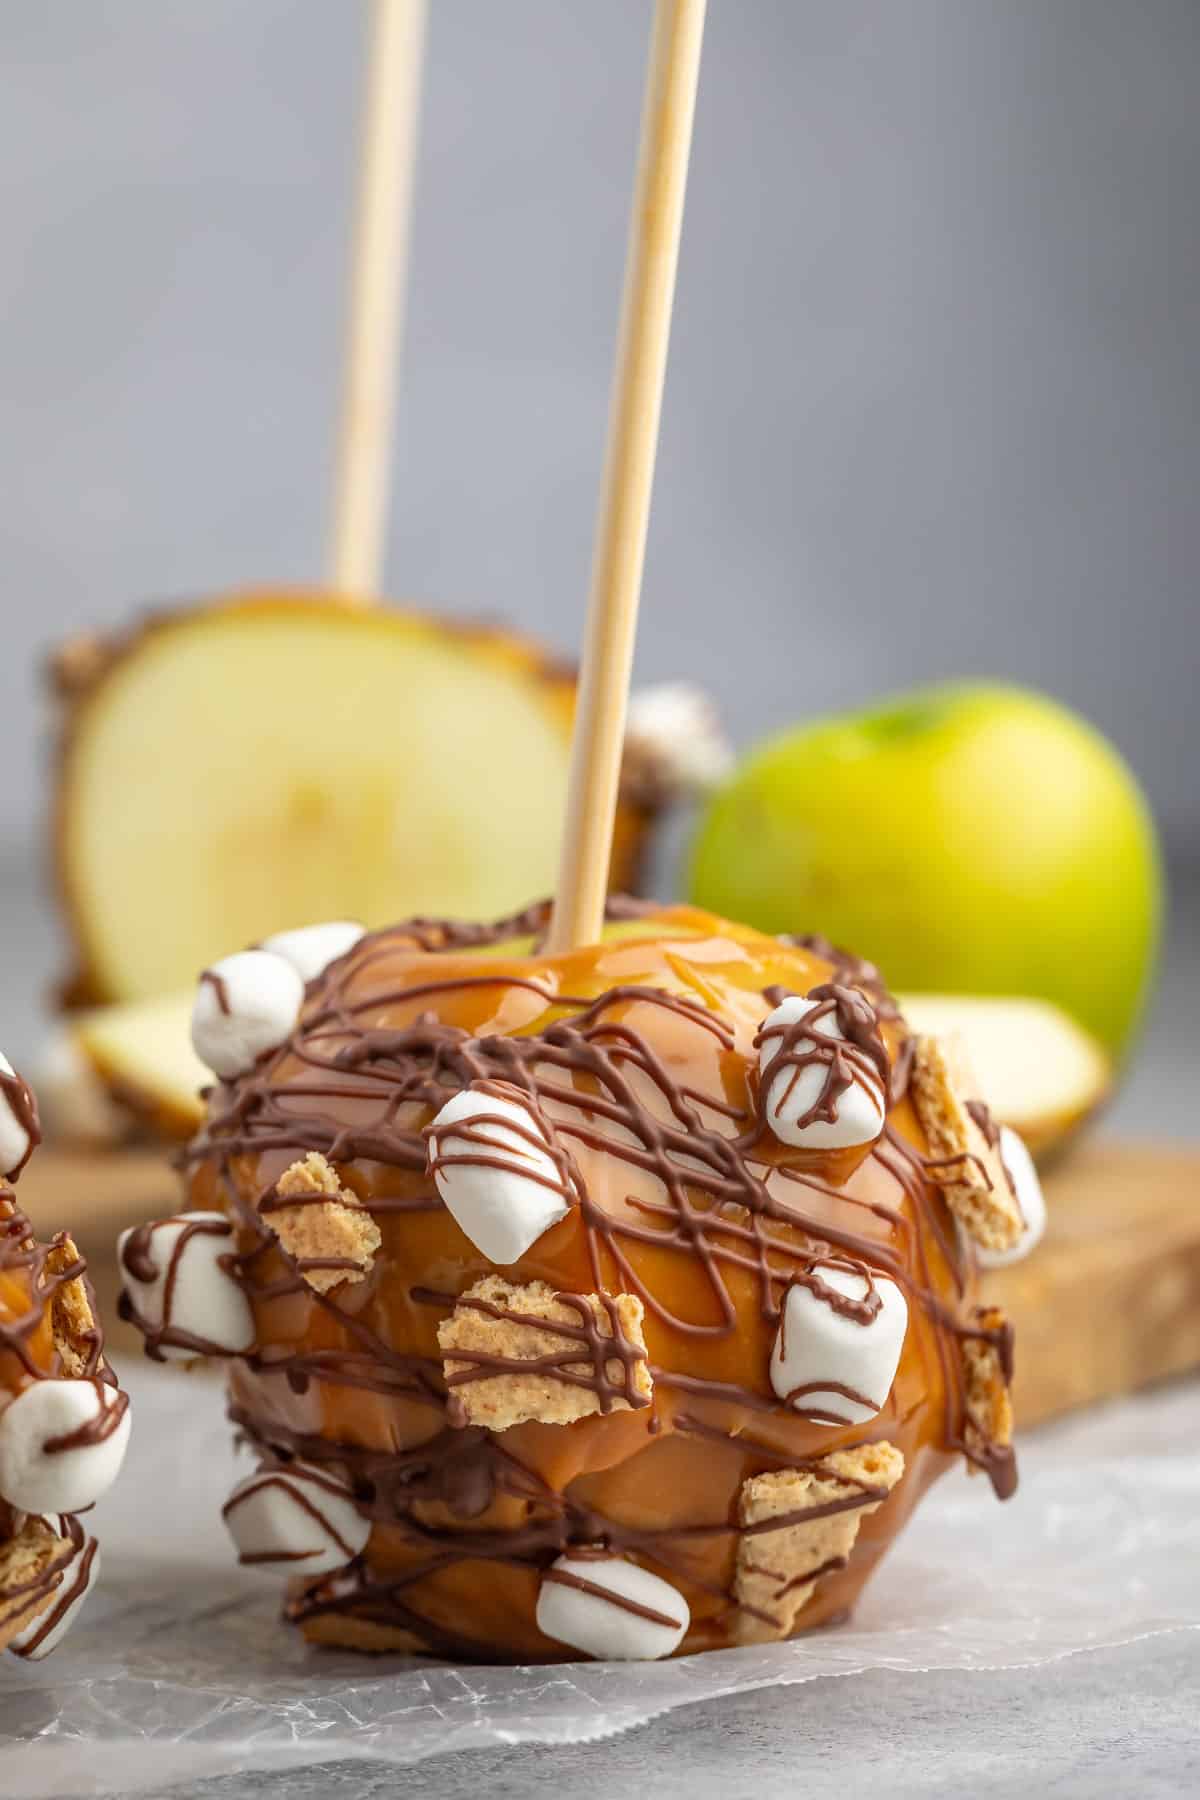 green apple dipped in caramel and chocolate with marshmallows and graham cracker stuck to side.